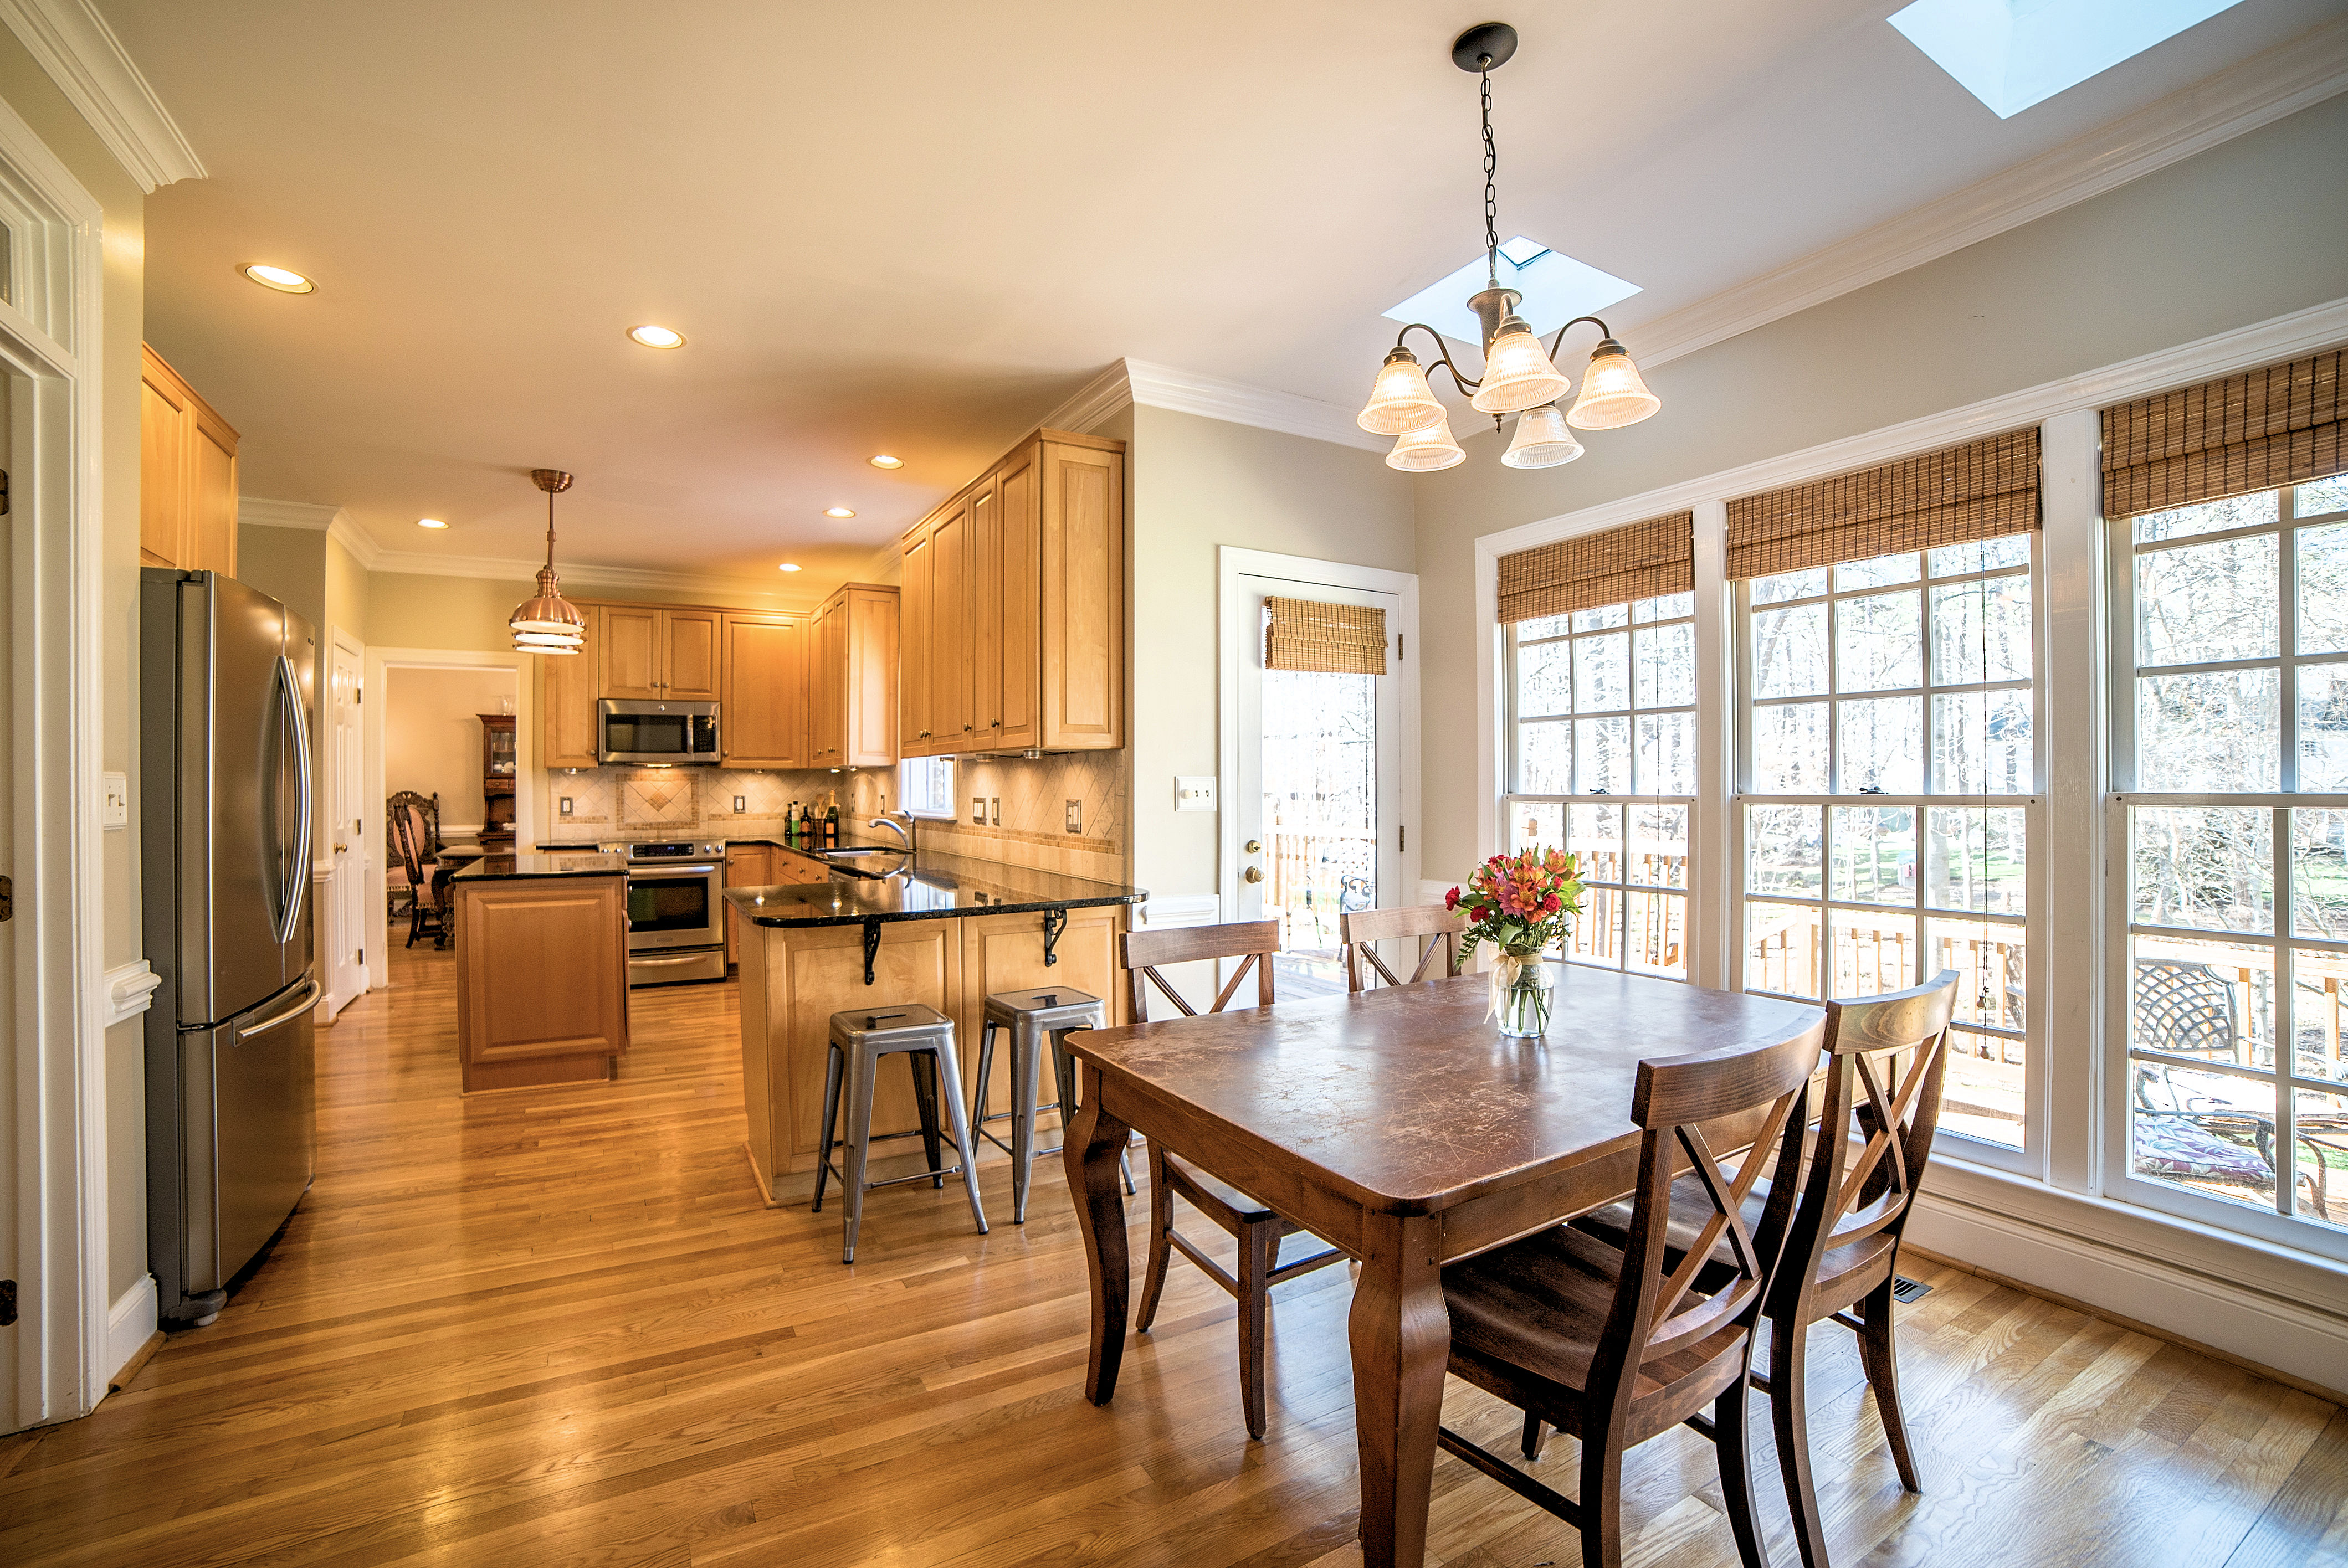 4316-blossom-hill-raleigh-nc-27613-kitchenand-breakfast-area